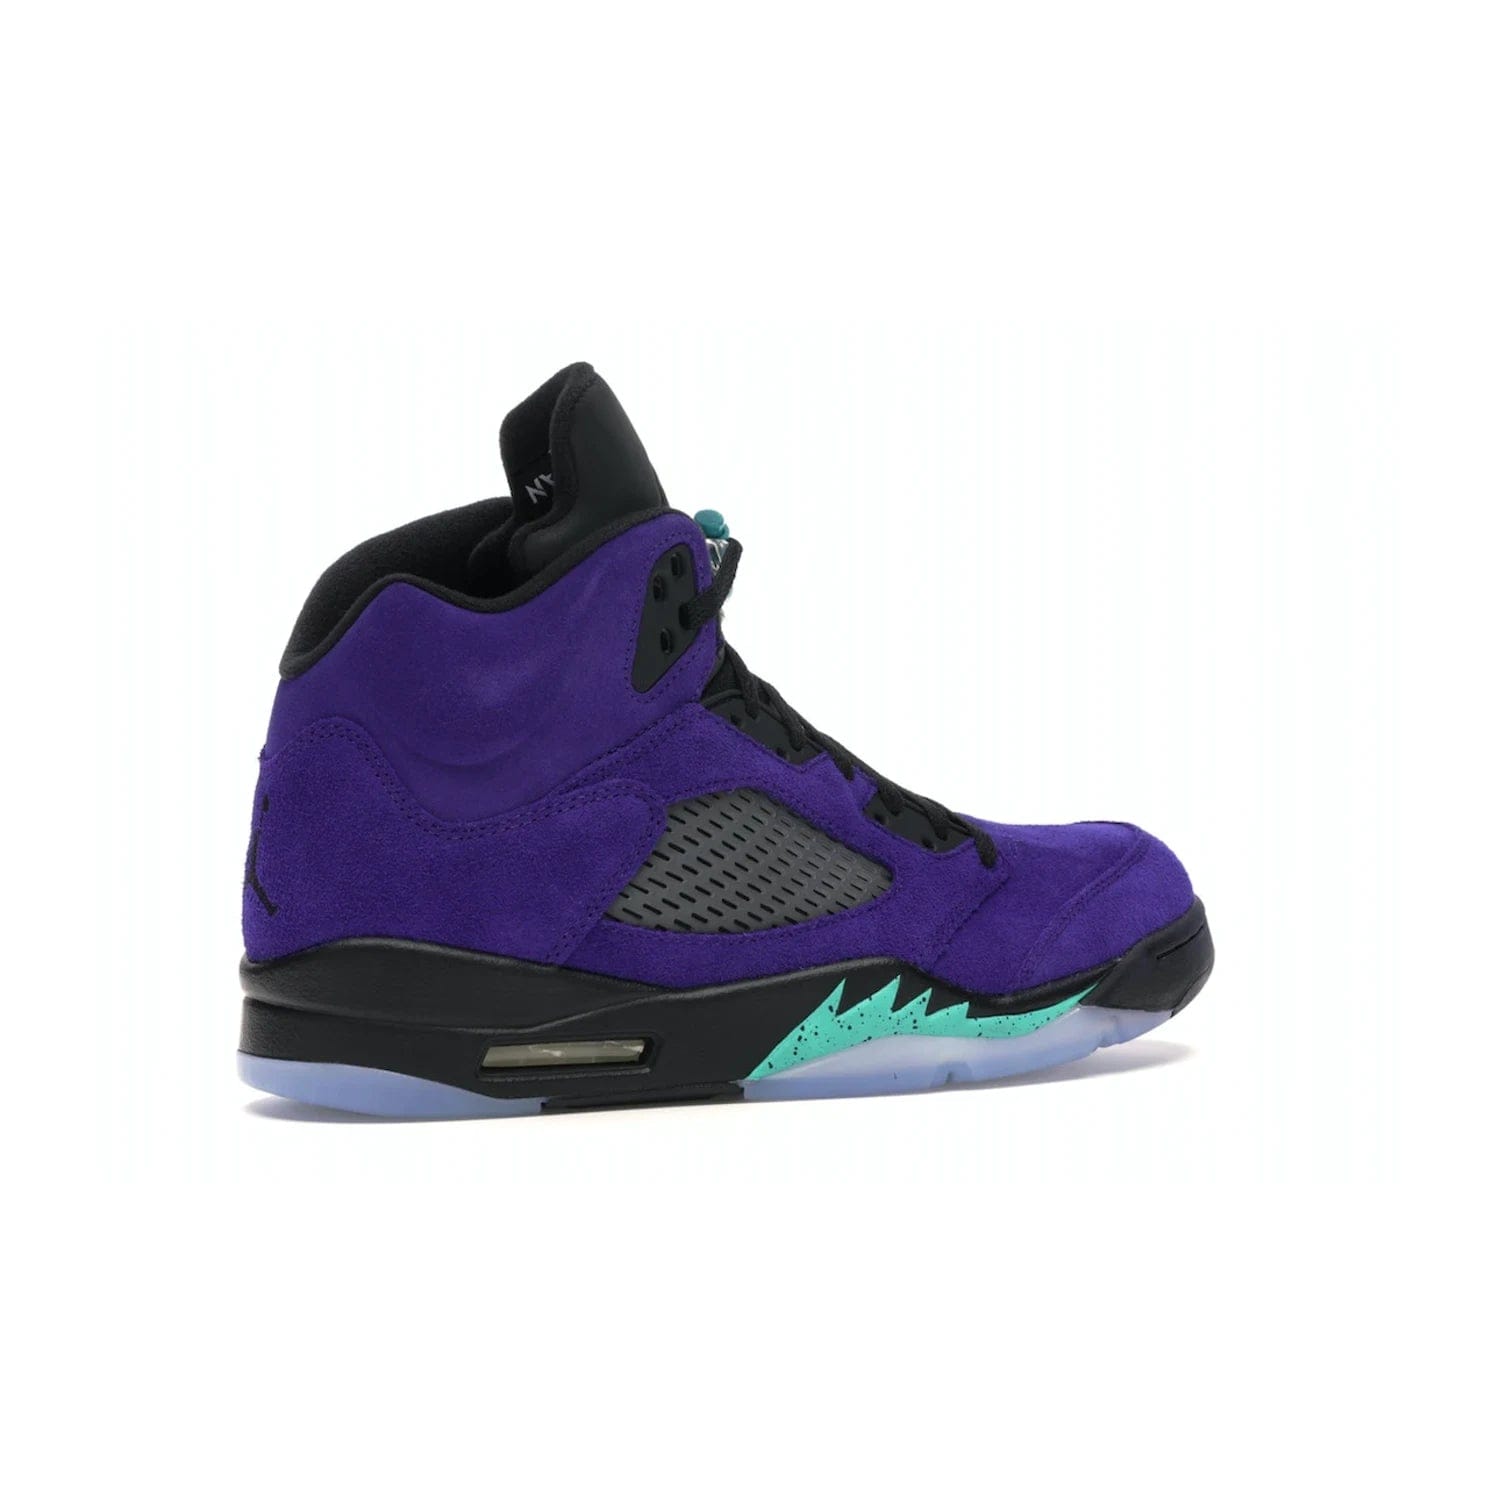 Jordan 5 Retro Alternate Grape - Image 34 - Only at www.BallersClubKickz.com - Bring the classic Jordan 5 Retro Alternate Grape to your sneaker collection! Featuring a purple suede upper, charcoal underlays, green detailing, and an icy and green outsole. Releasing for the first time since 1990, don't miss this chance to add a piece of sneaker history to your collection.